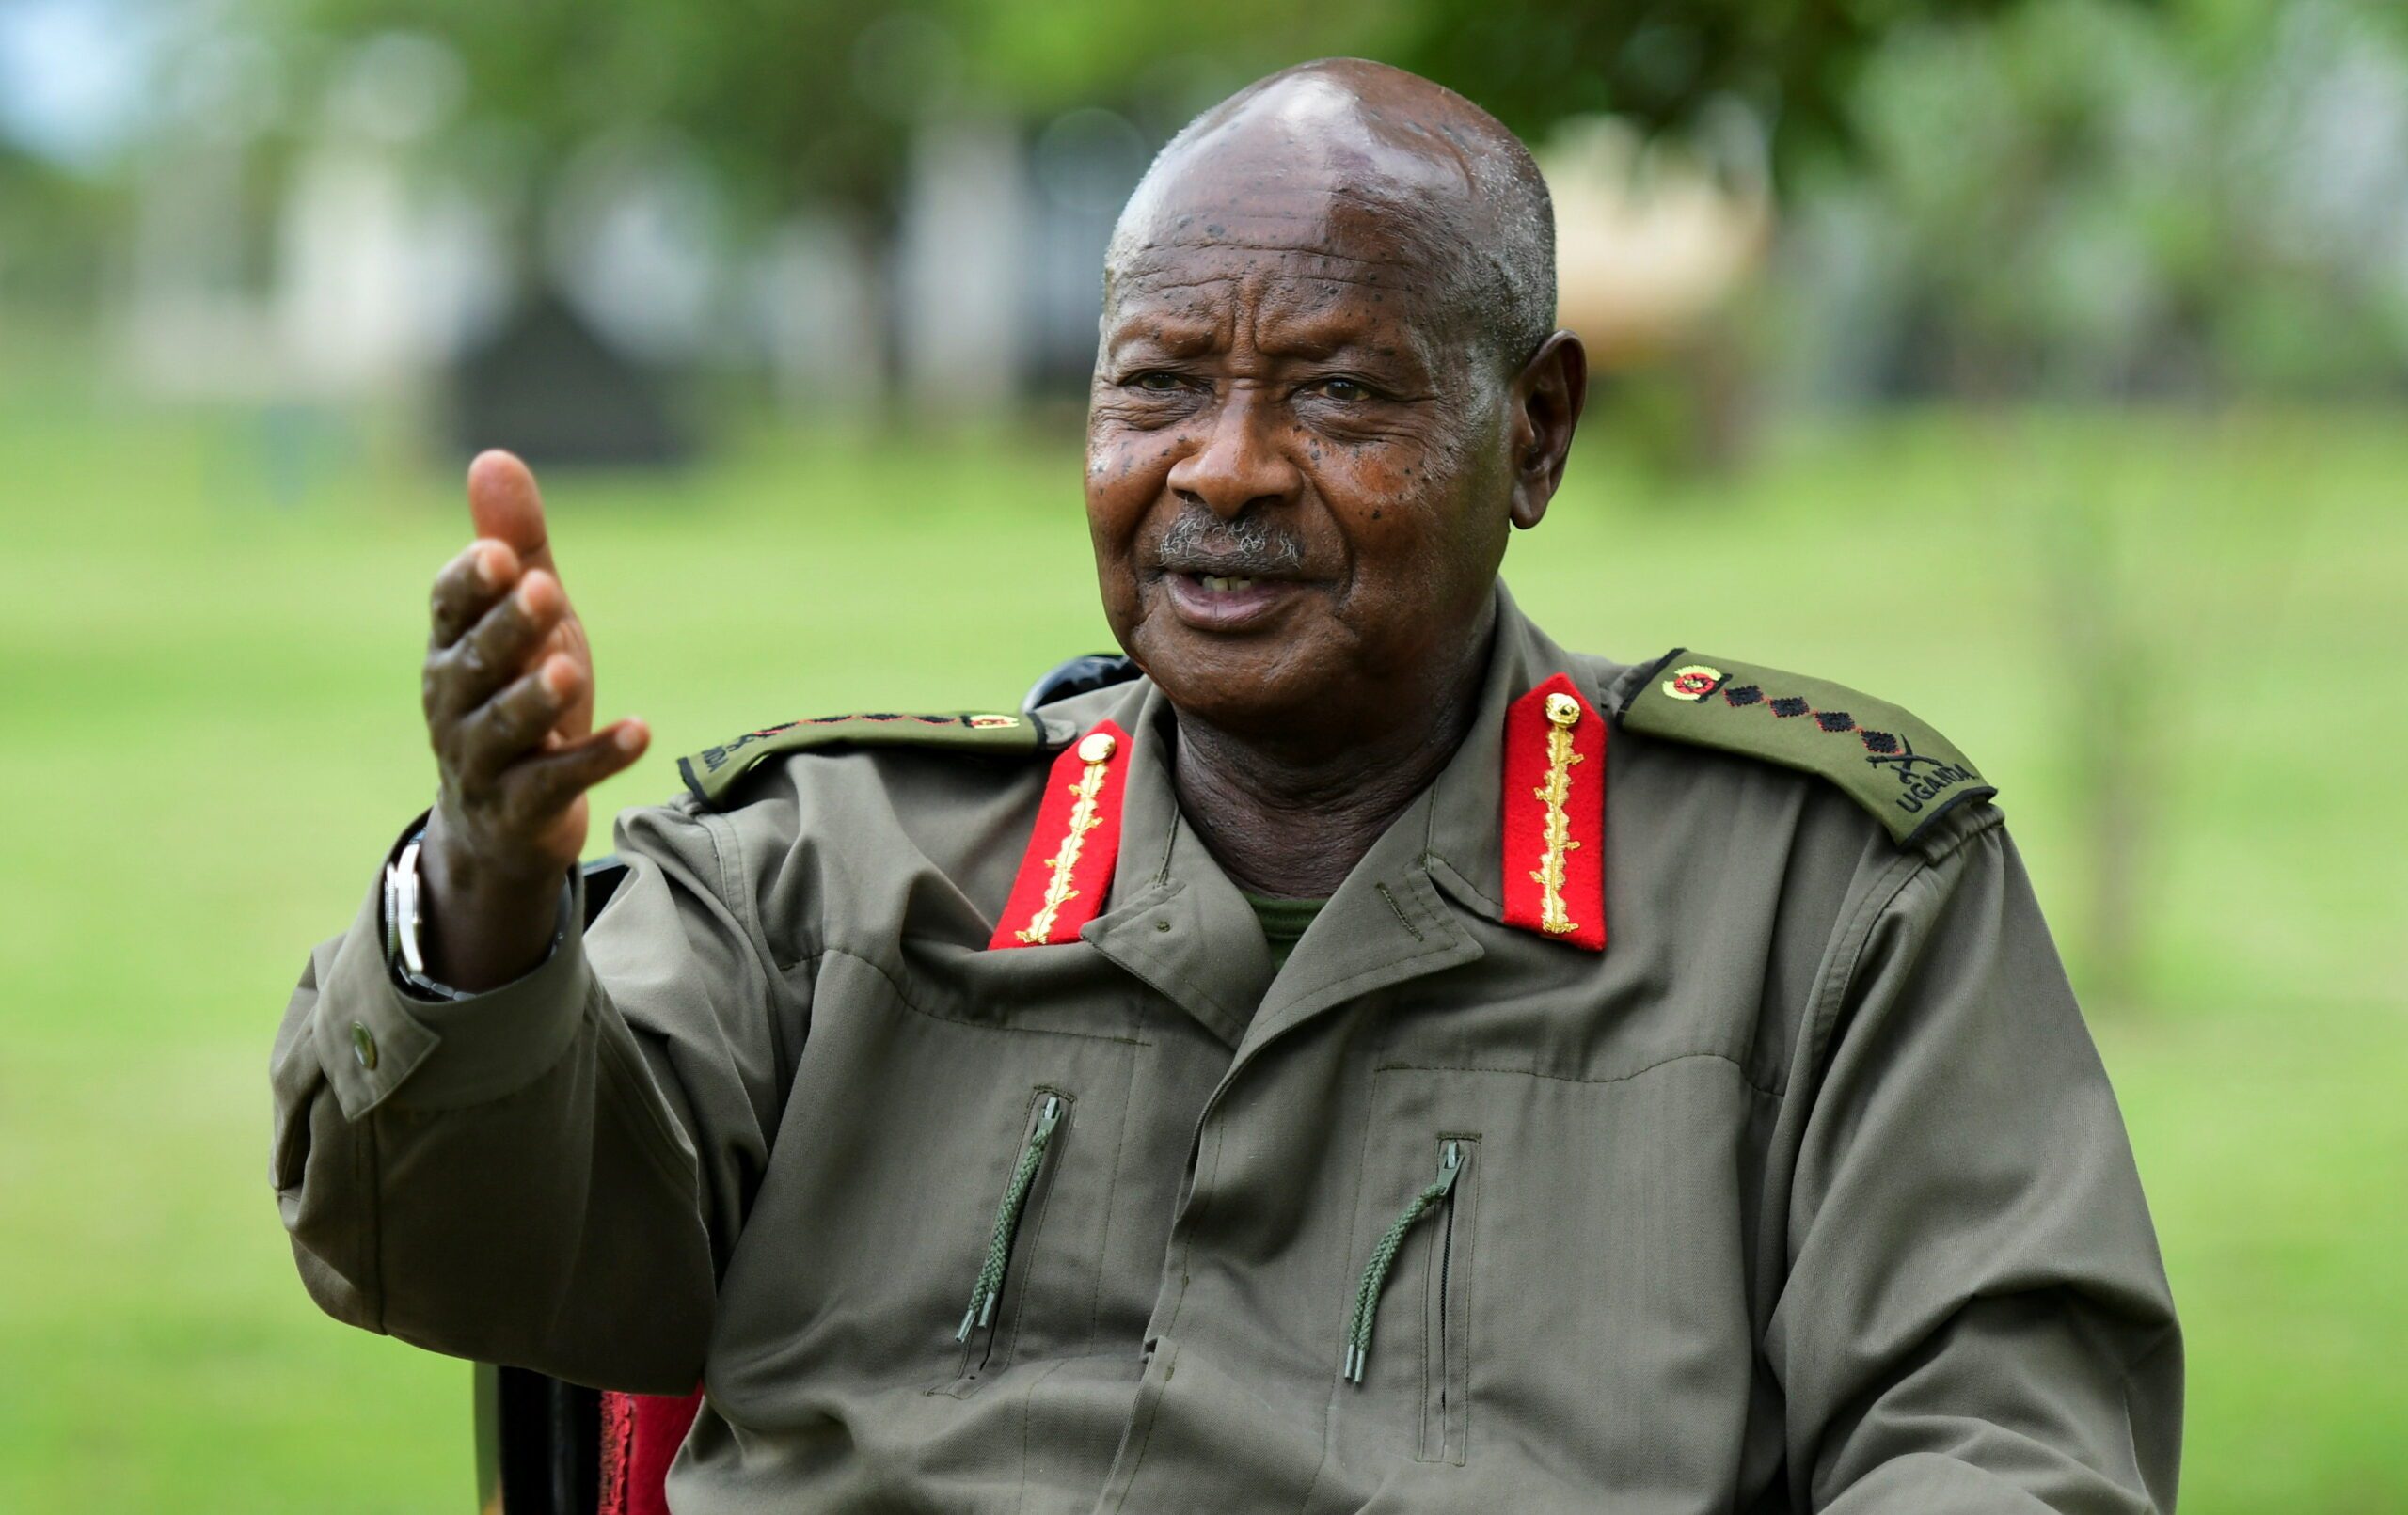 Western companies are blind to Ugandan investments, says President Museveni